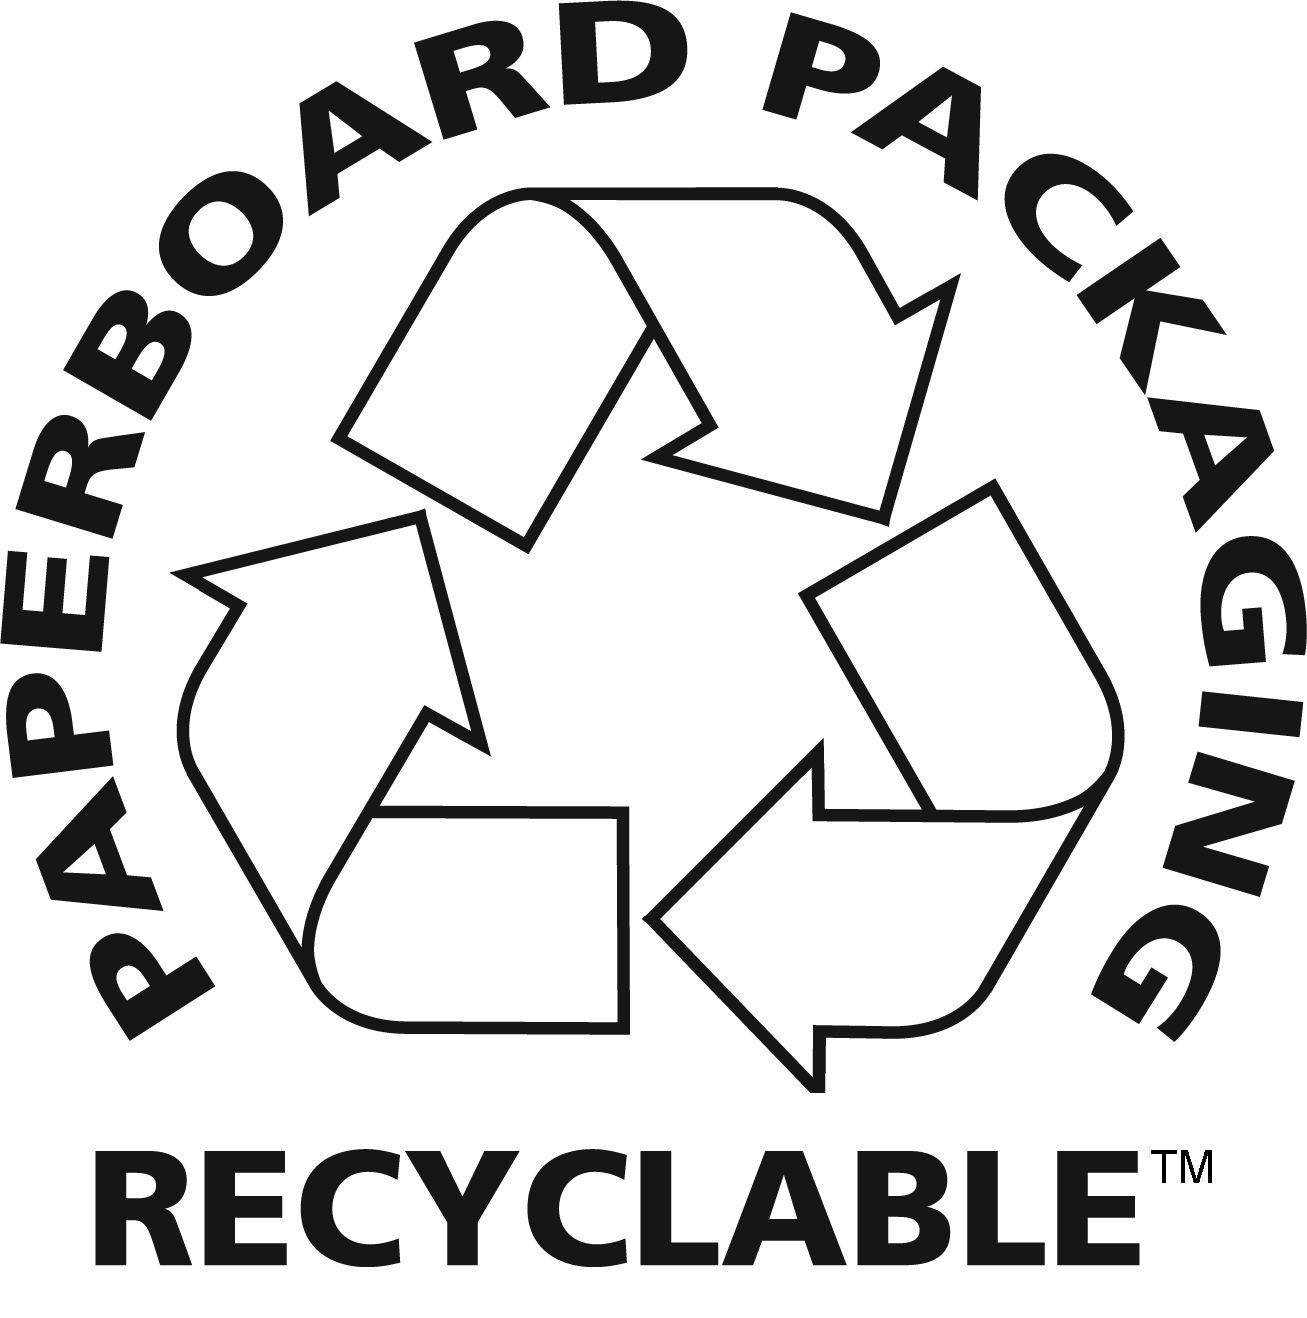 Black and White Recycle Logo - Recyclable Logo